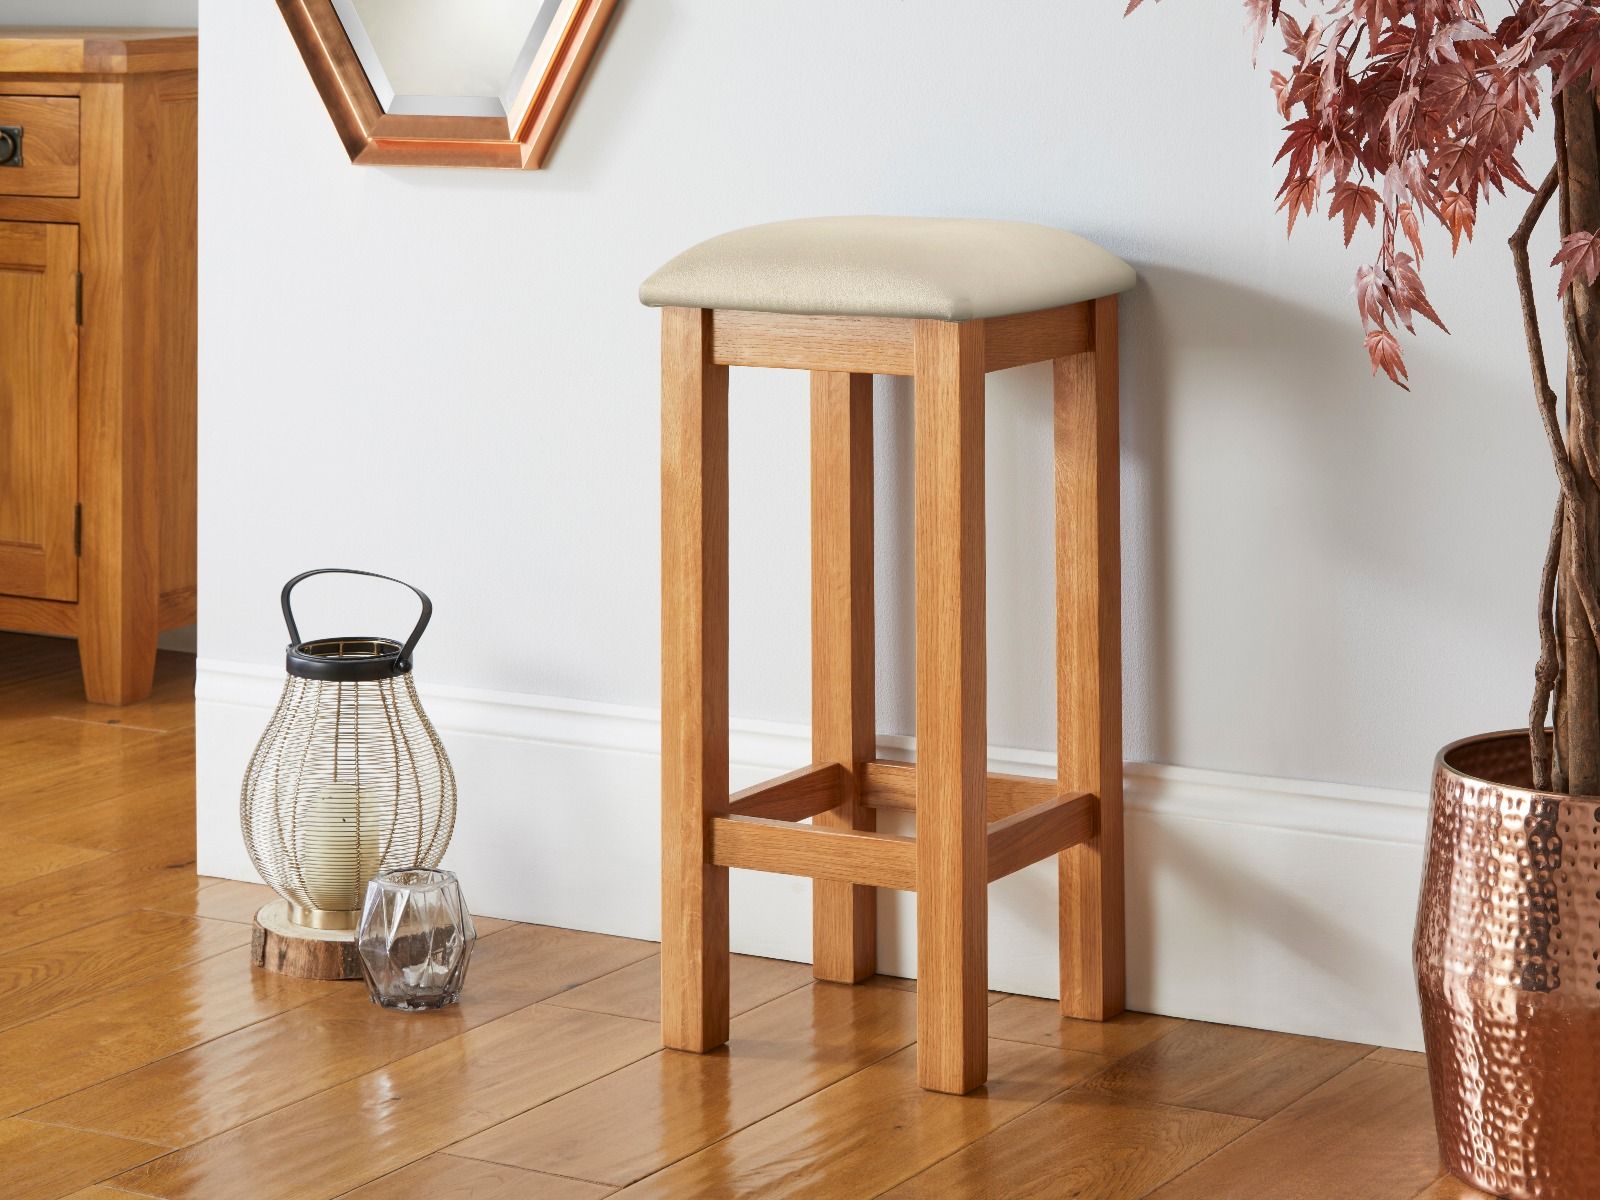 Baltic Solid Oak Cream Leather Small Kitchen Bar Stool - 25% OFF WINTER SALE